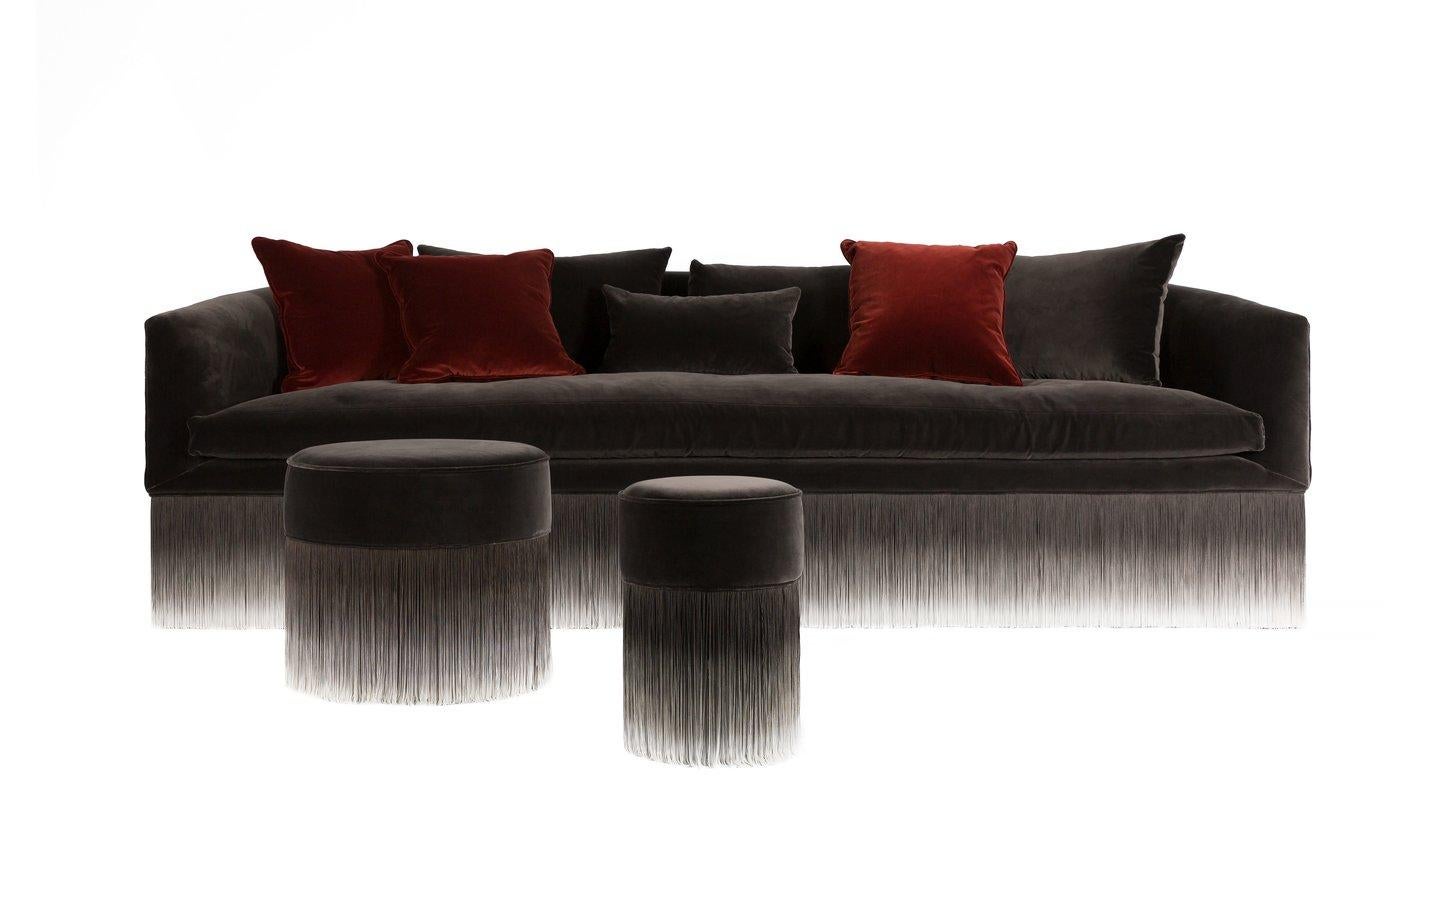 Modern Moooi Amami Sofa with Fringes in Dark Grey Upholstery by Lorenza Bozzoli For Sale